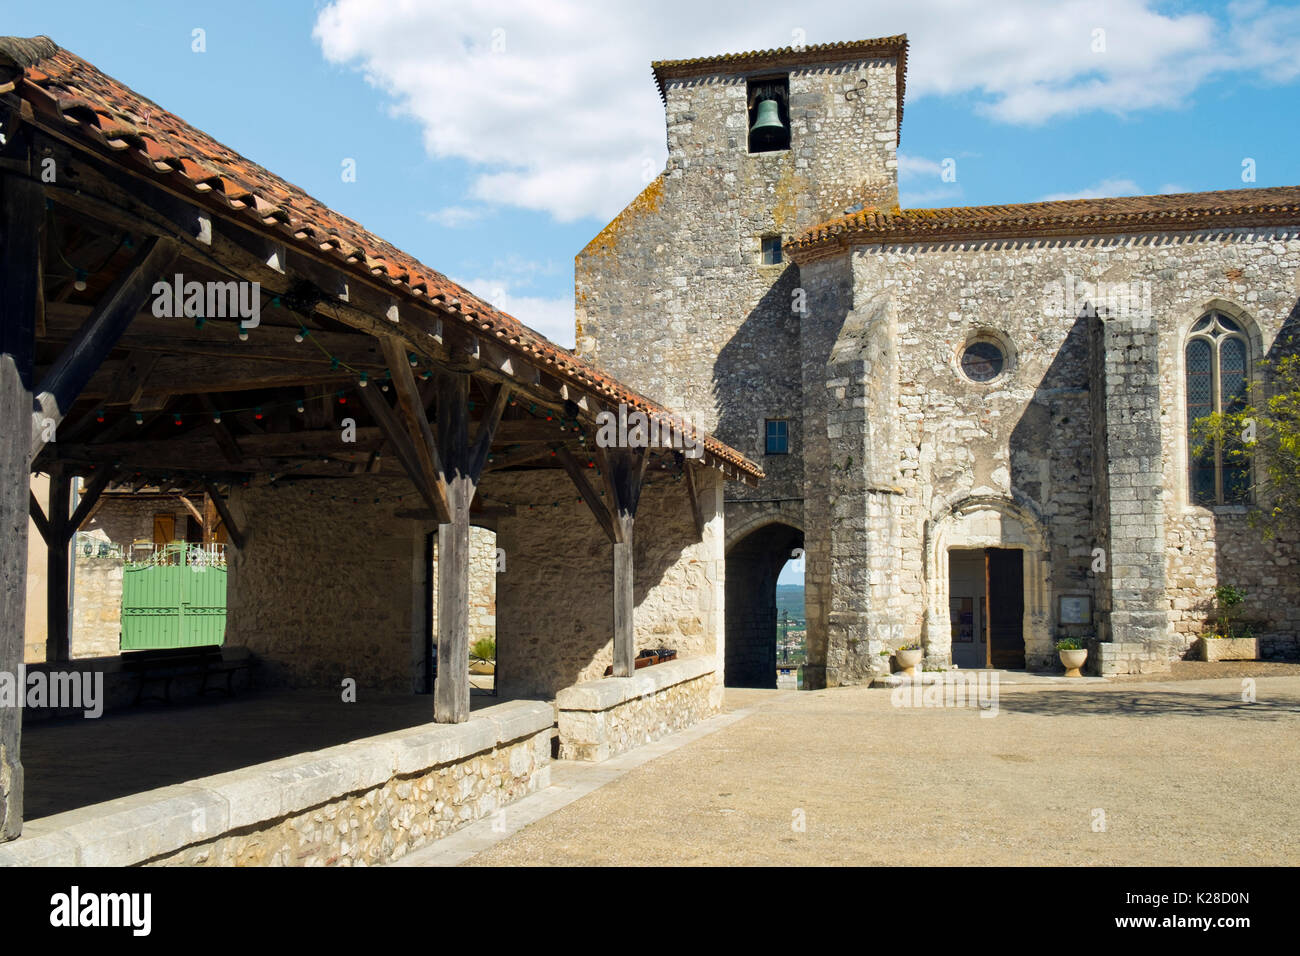 Market hall and church in spring sunshine in Pujols, Lot-et-Garonne, France. Stock Photo